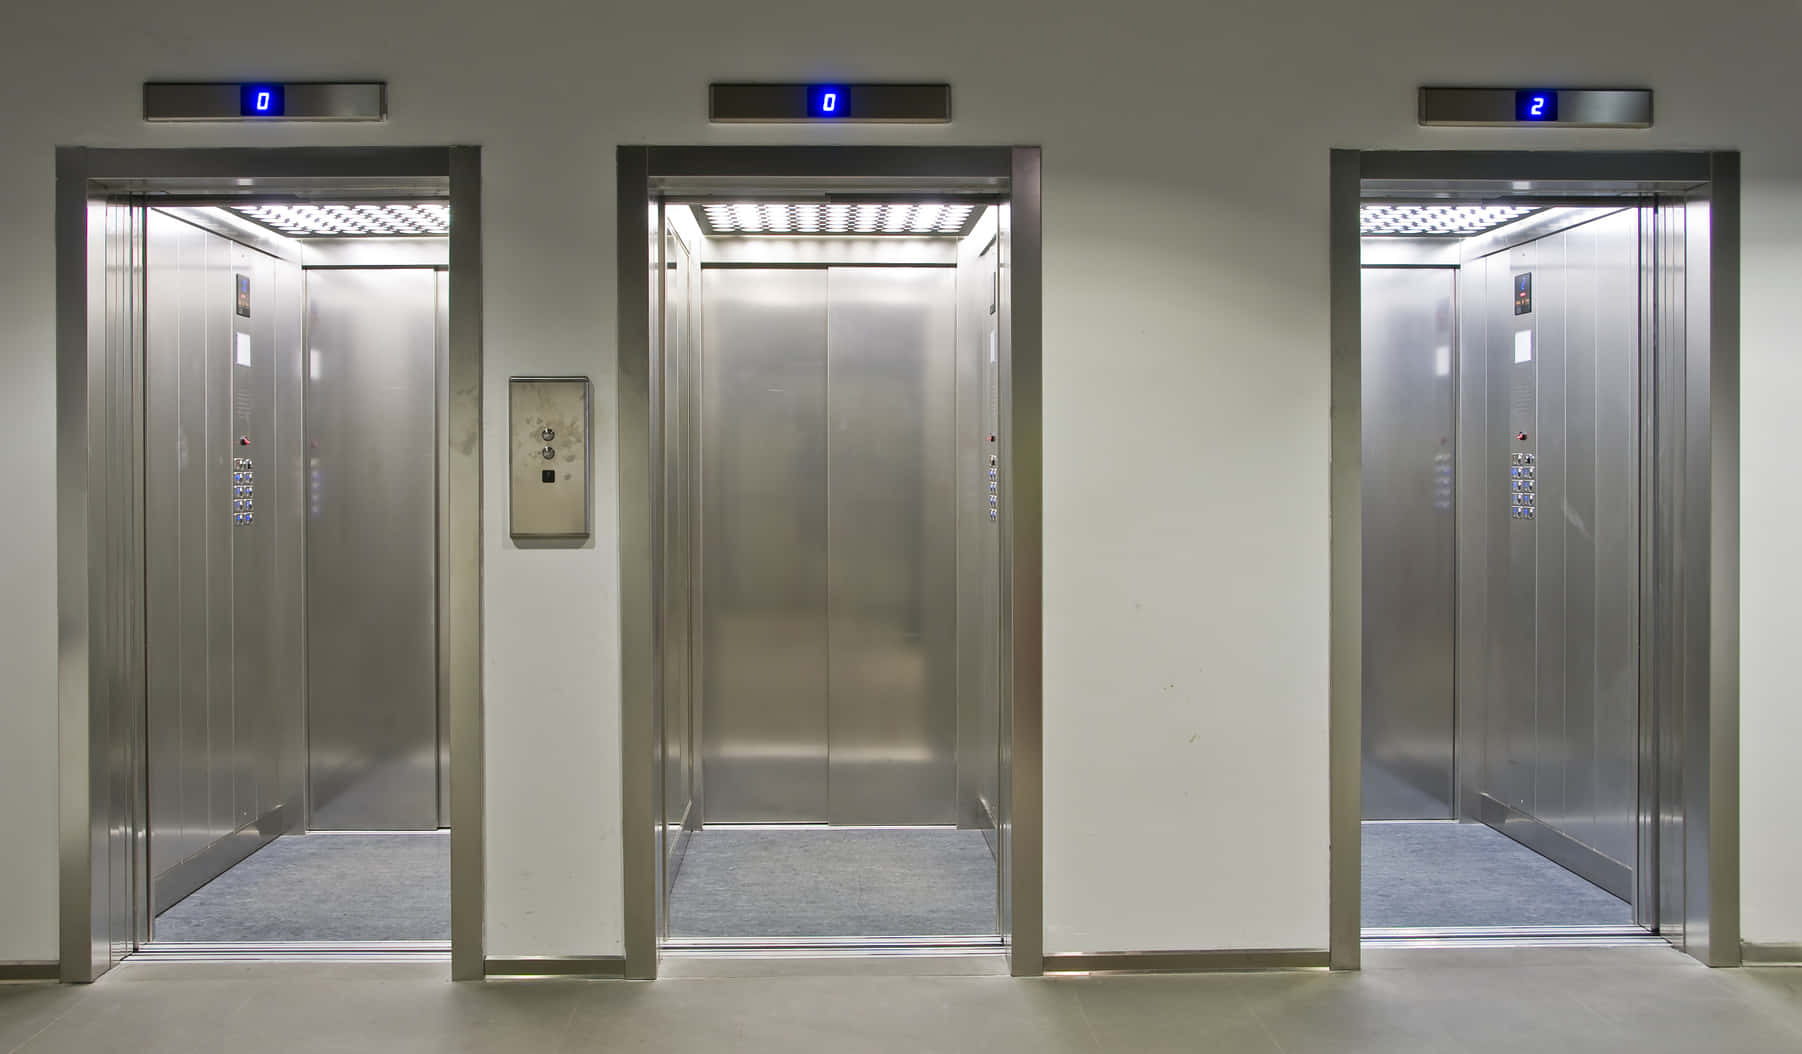 Four Elevators In A Building With Blue Lights